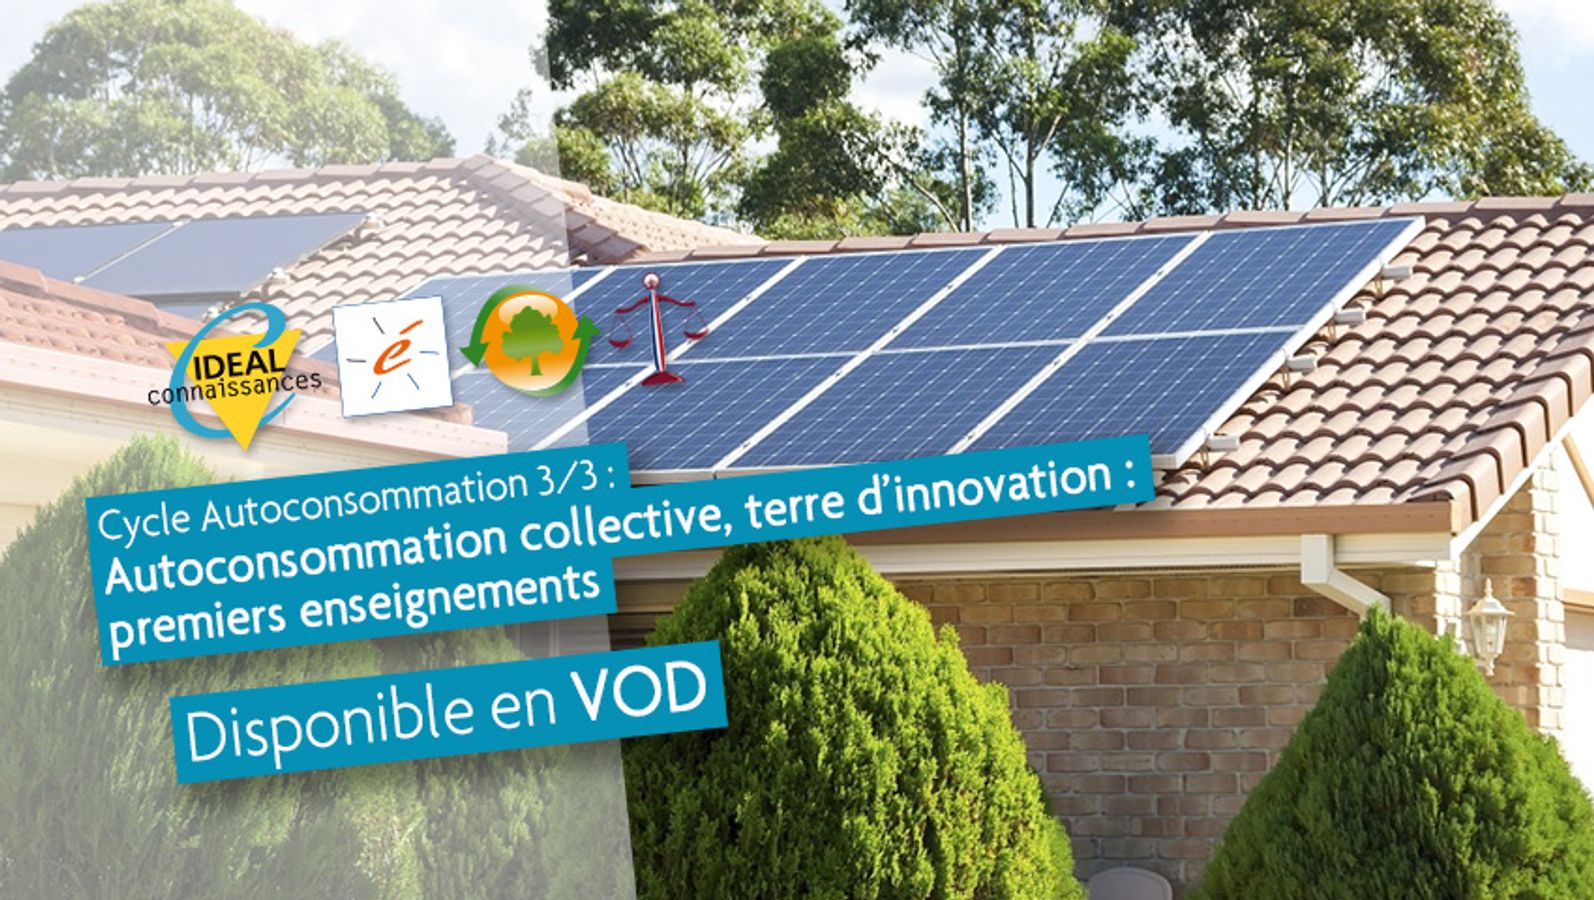 Cycle Autoconsommation 3/3 : Autoconsommation collective, terre d’innovation : premiers enseignements